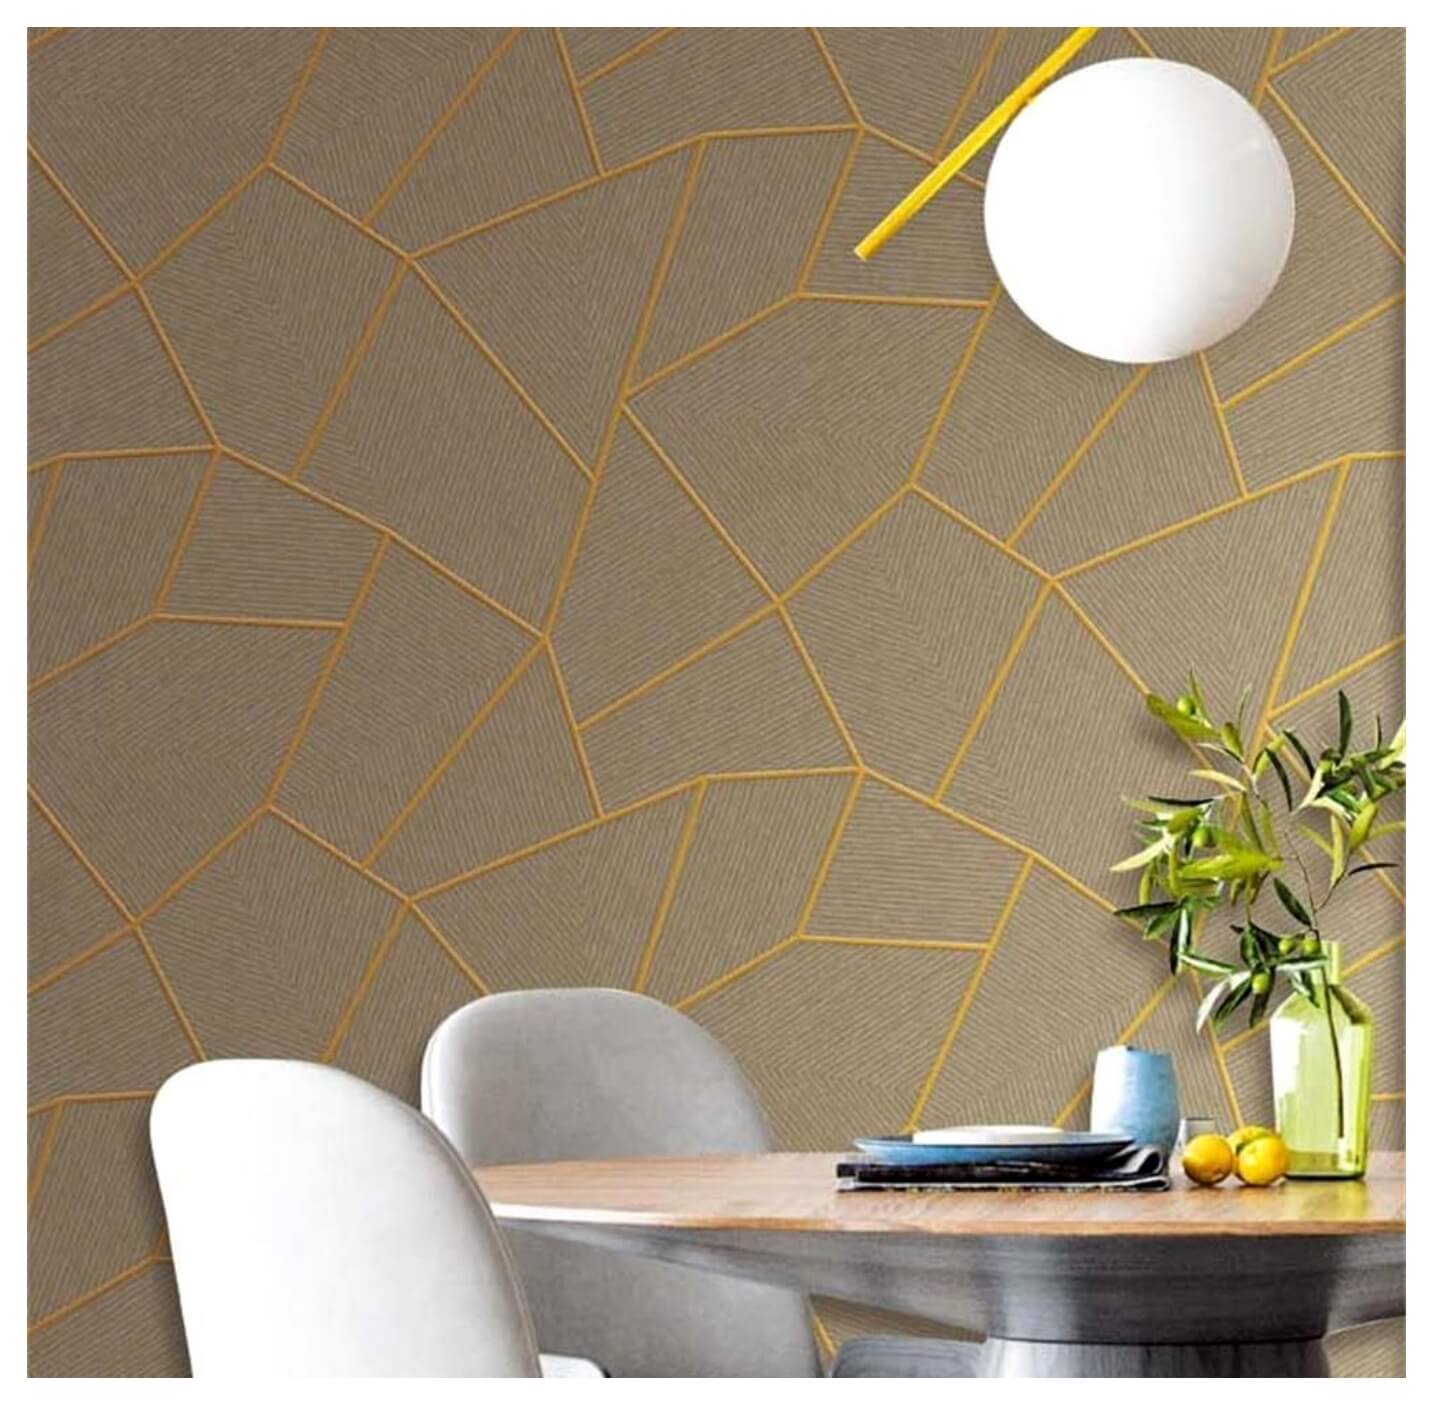 Beautiful Color 3D Design Wallpaper Better choice For Living Area, Bedroom, kids room, Office Durable PVC Wallpapers (37)